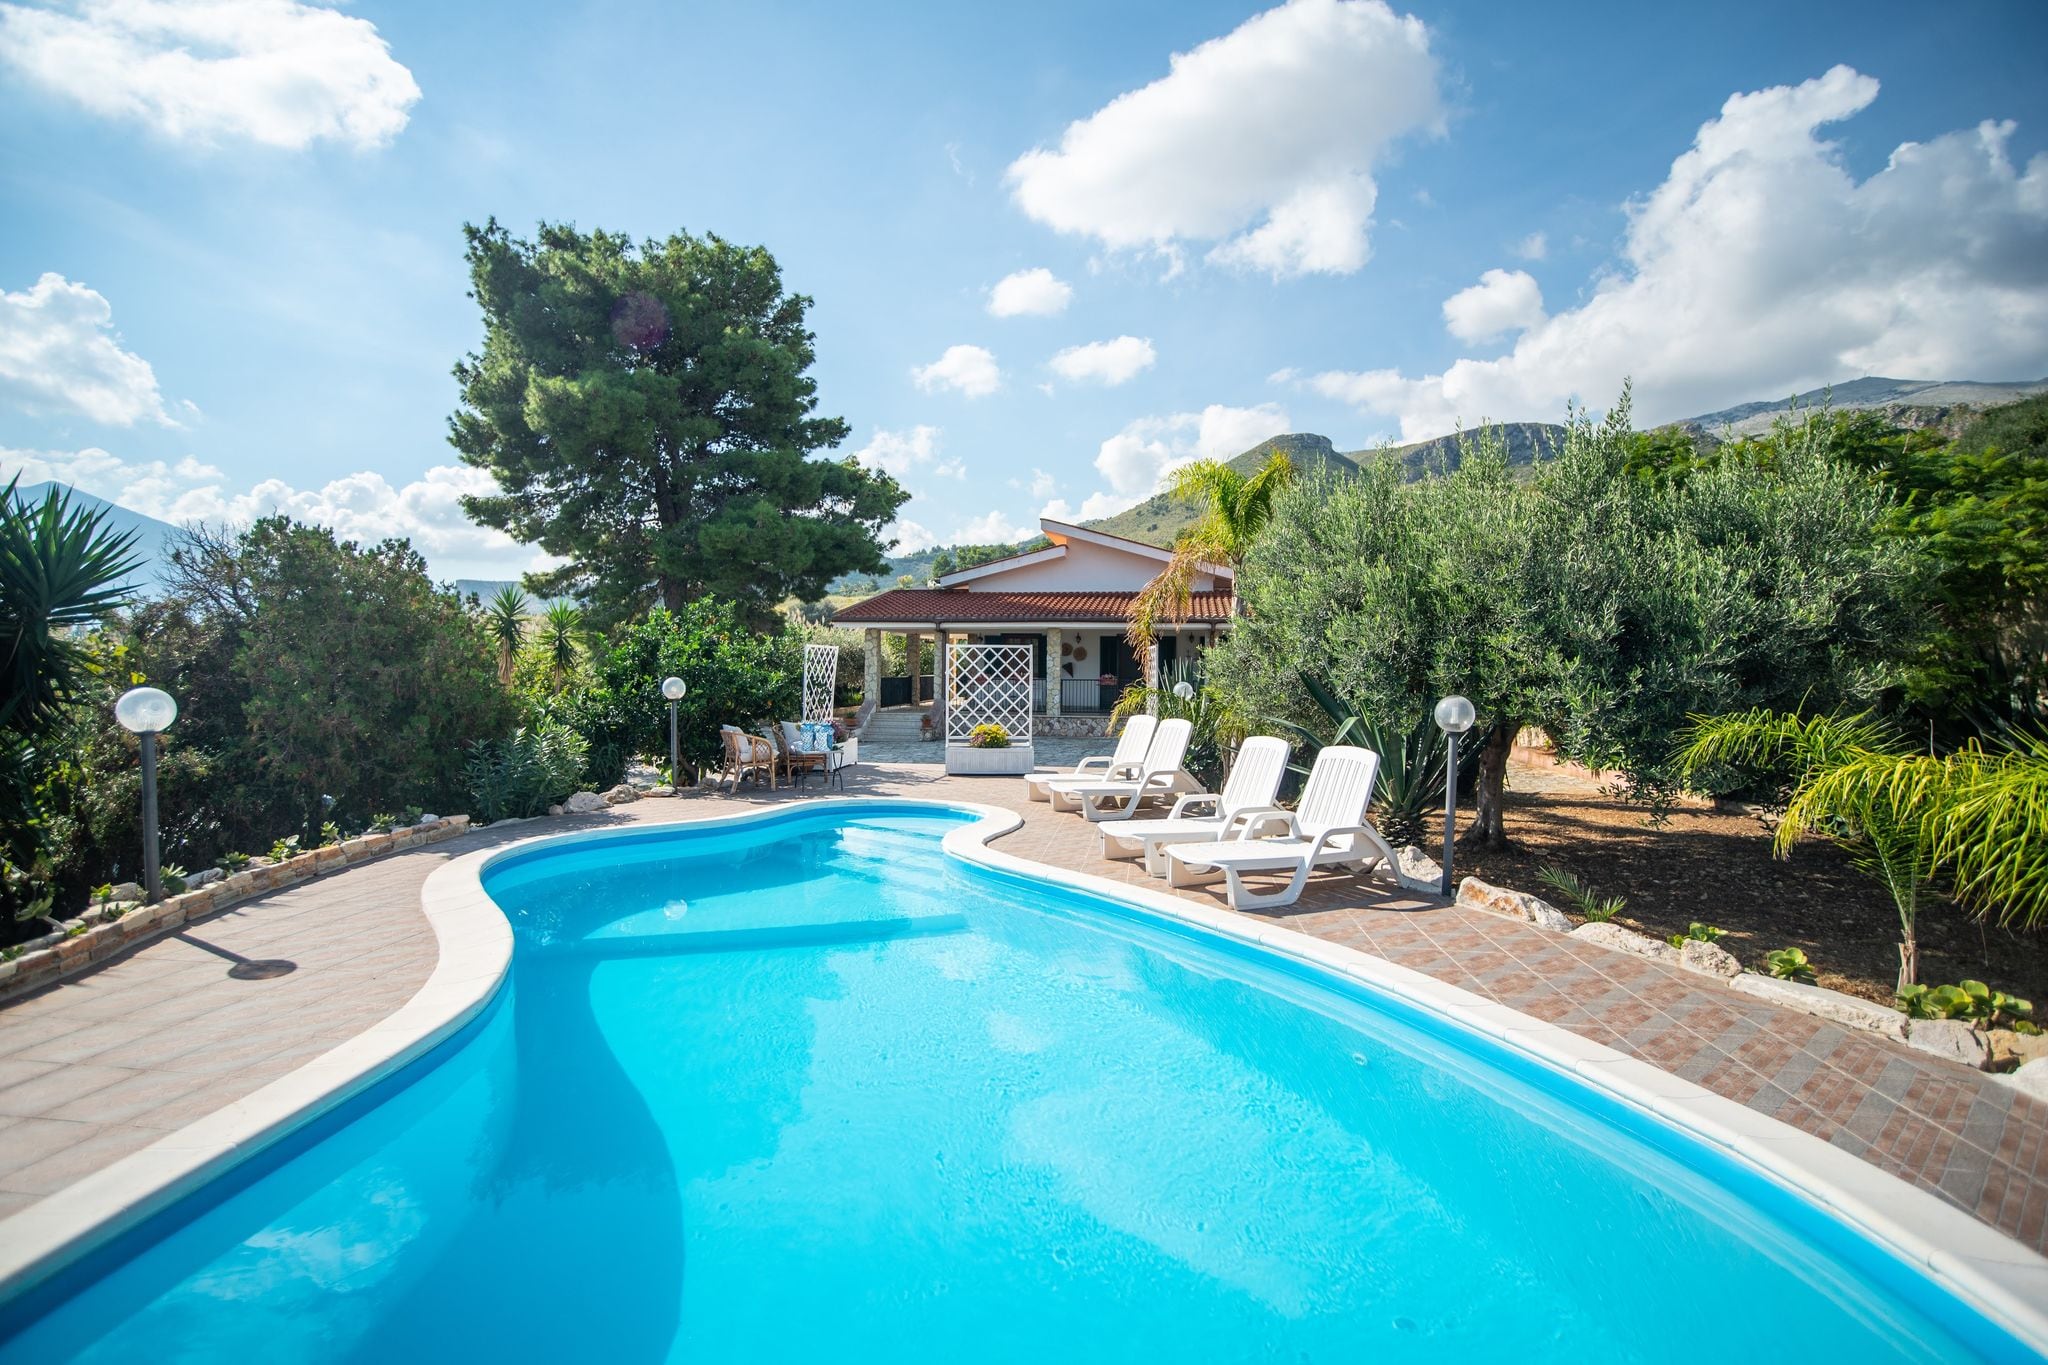 Villa with annex, only 150m from the sea but also with private pool!